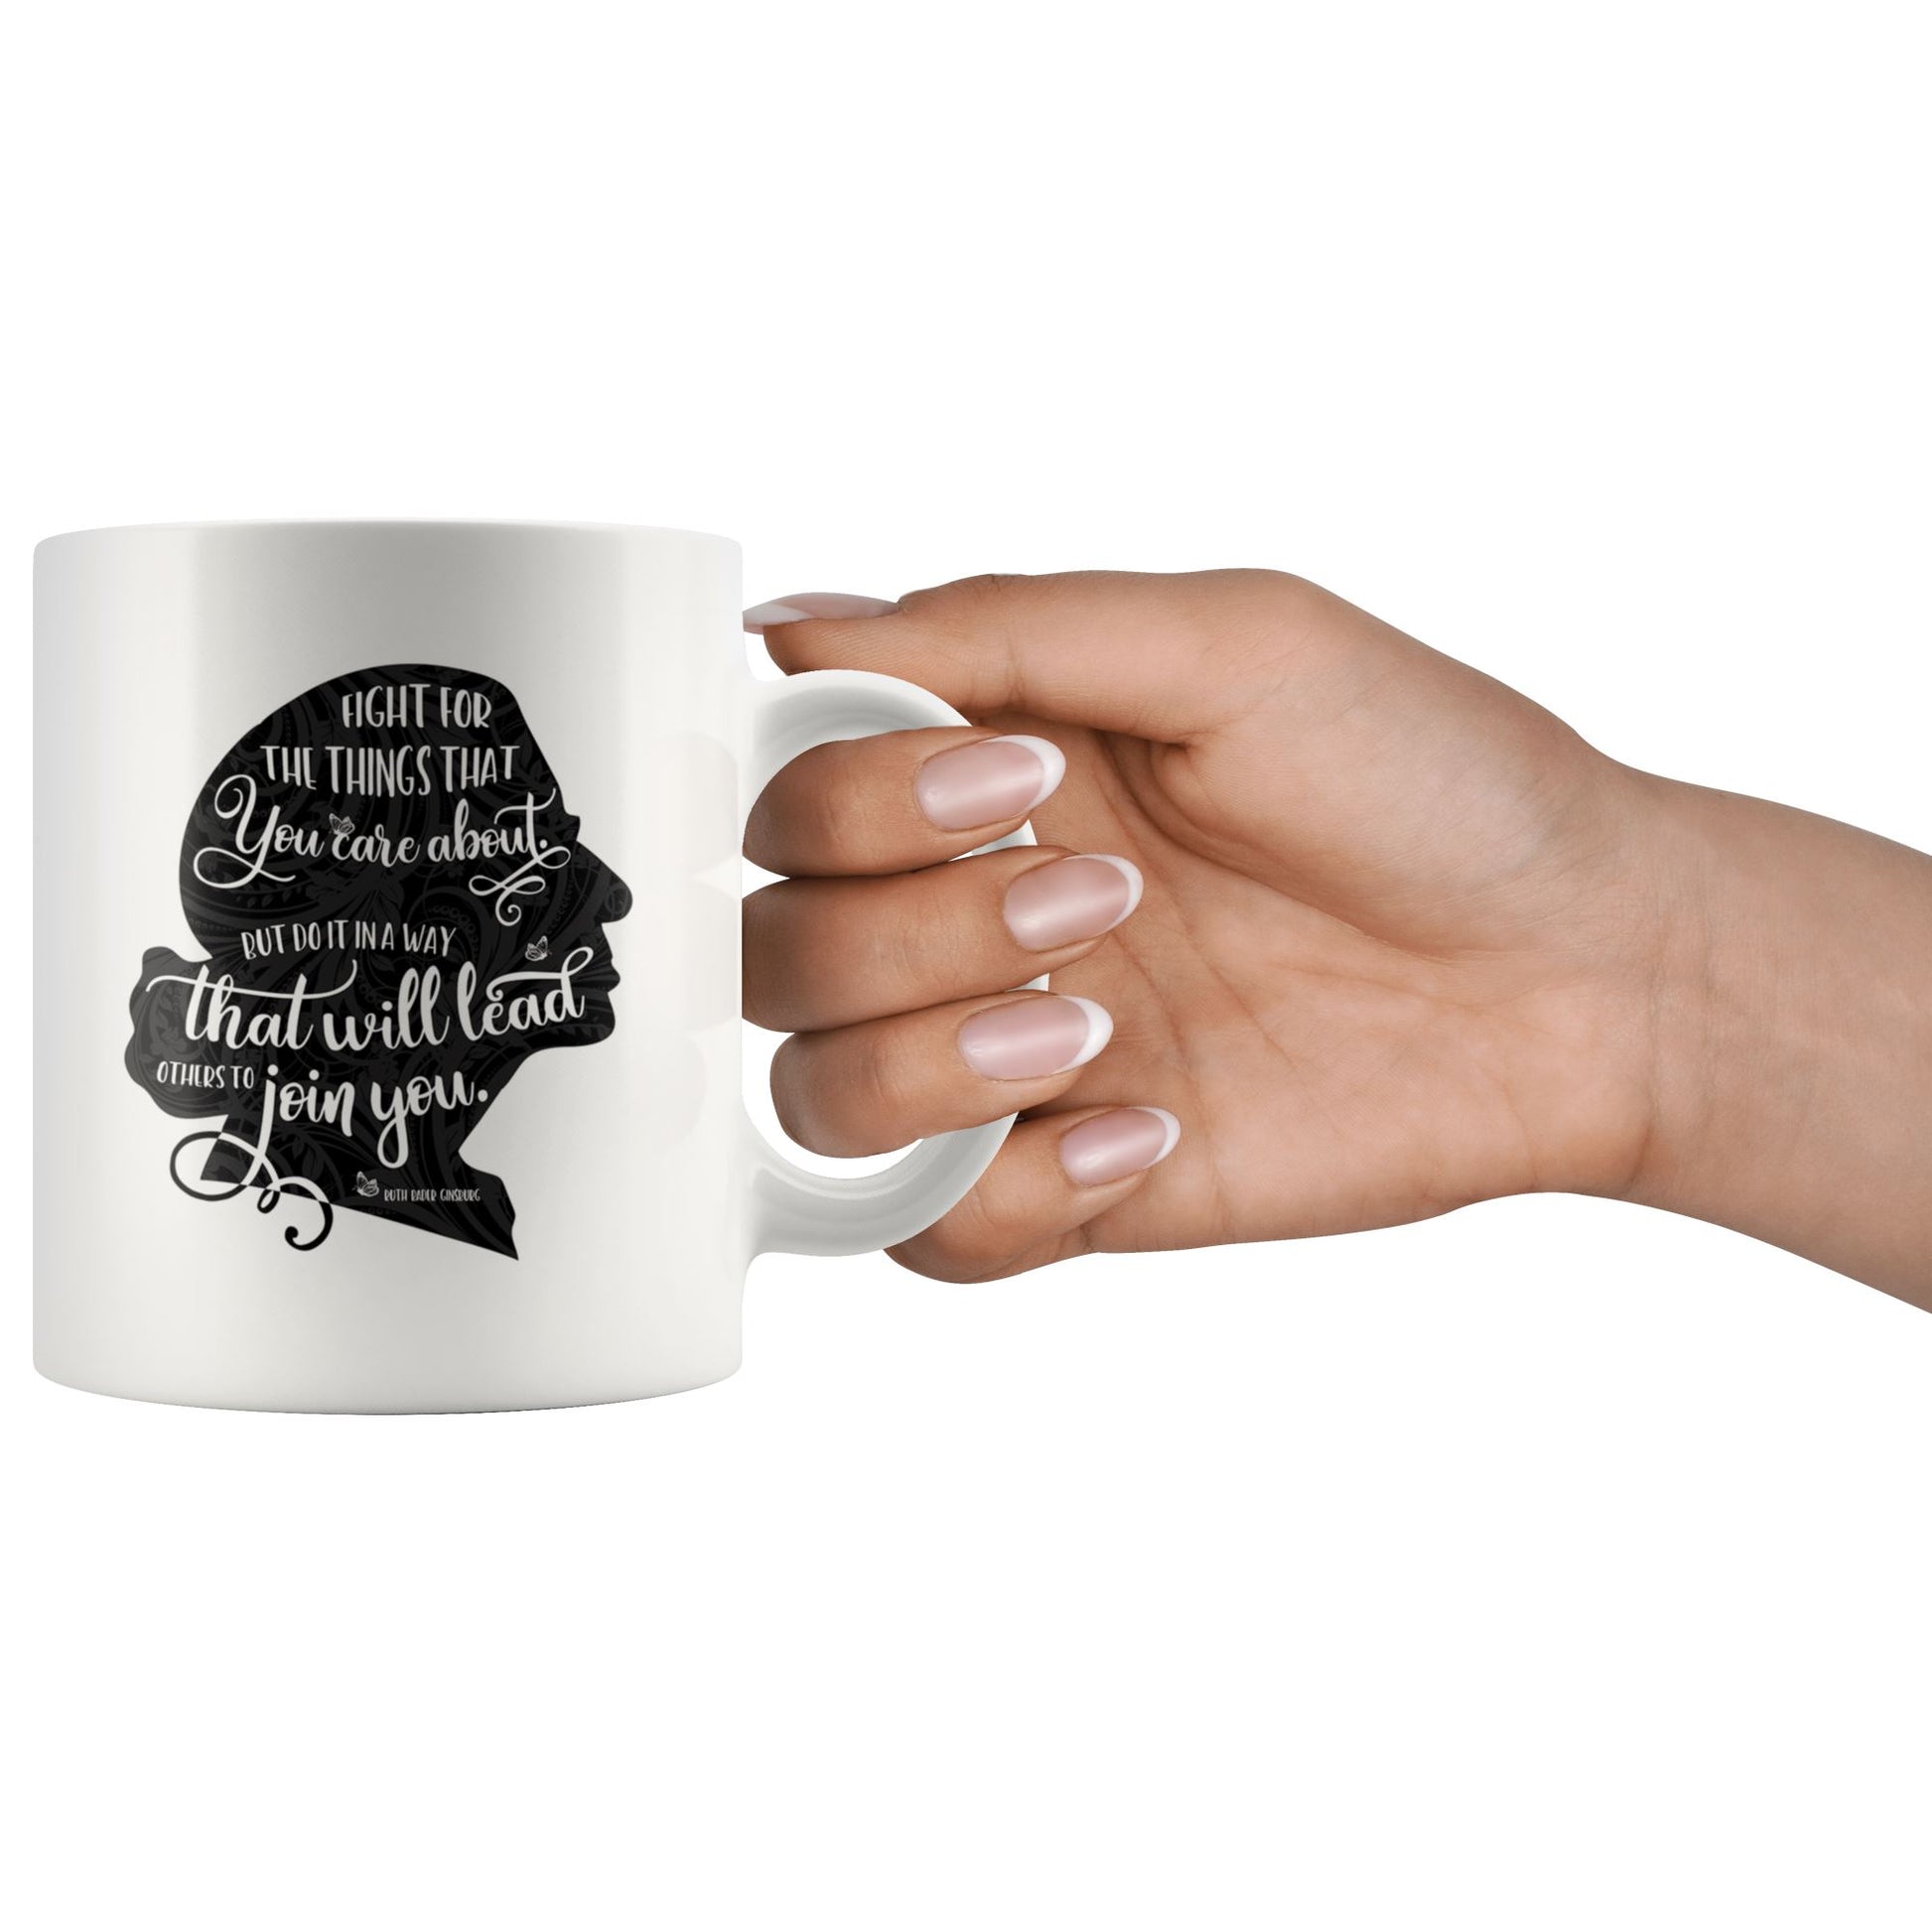 Fight for the Things You Care About Ruth Bader Ginsburg Ceramic Coffee Mug Black Silhouette 11oz. or 15oz.